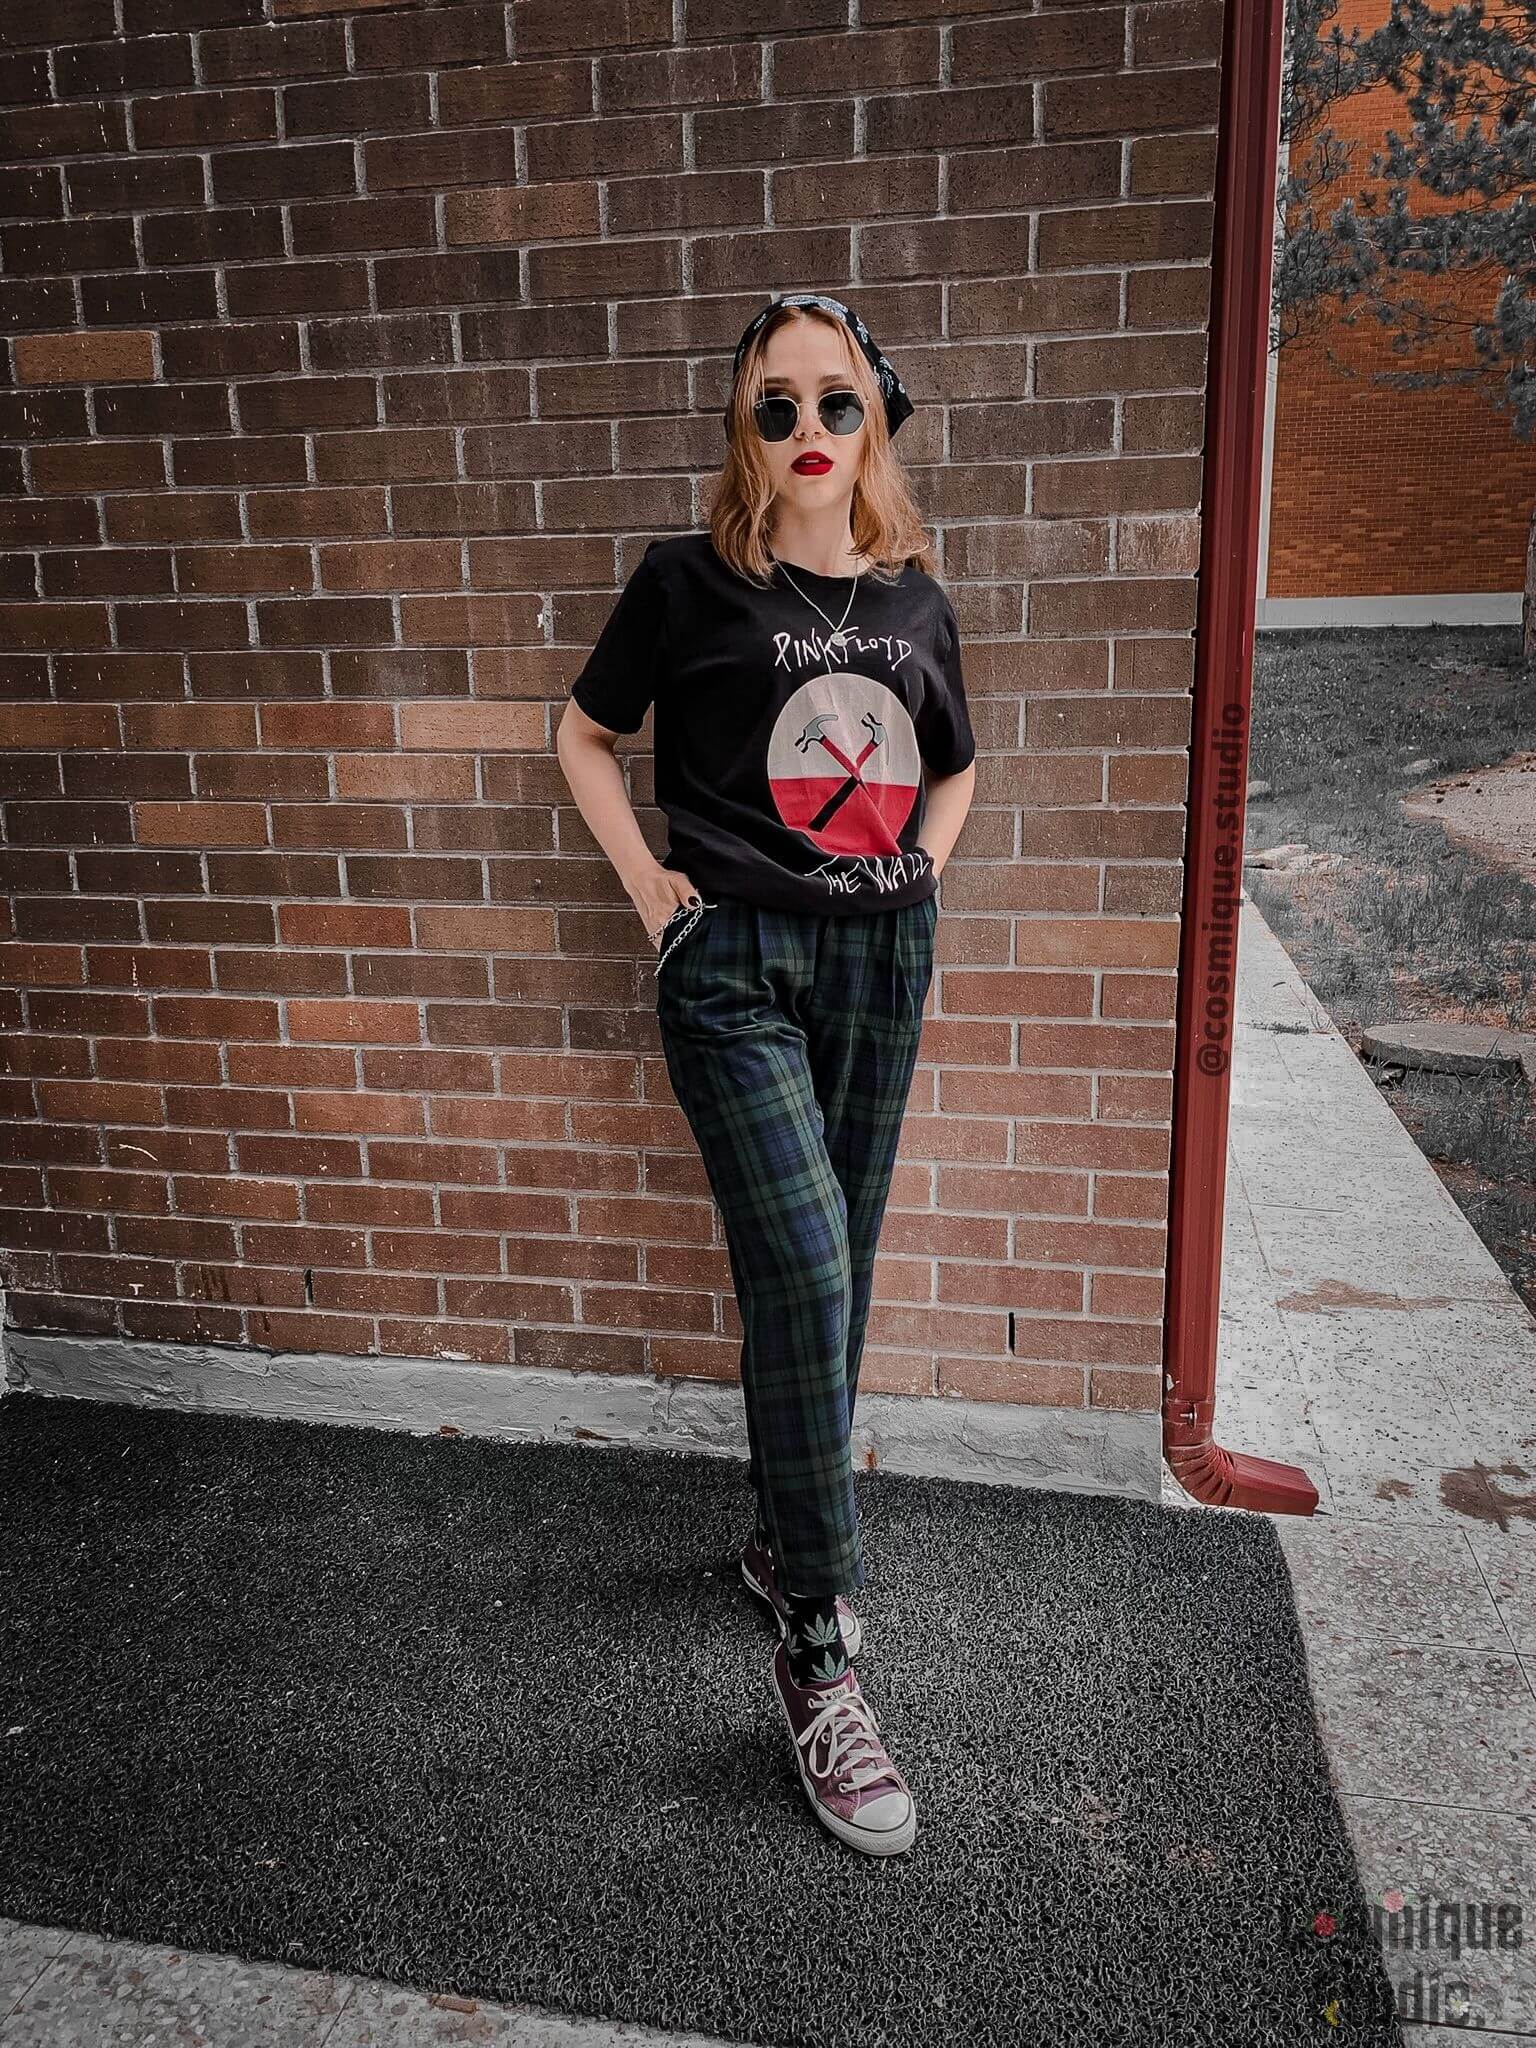 grunge girl outfit in front of a tile wall wearing pink floyd band t-shirt, plaid baggy pants combined with black bandana, weed socks, purple leather converse and sunglasses